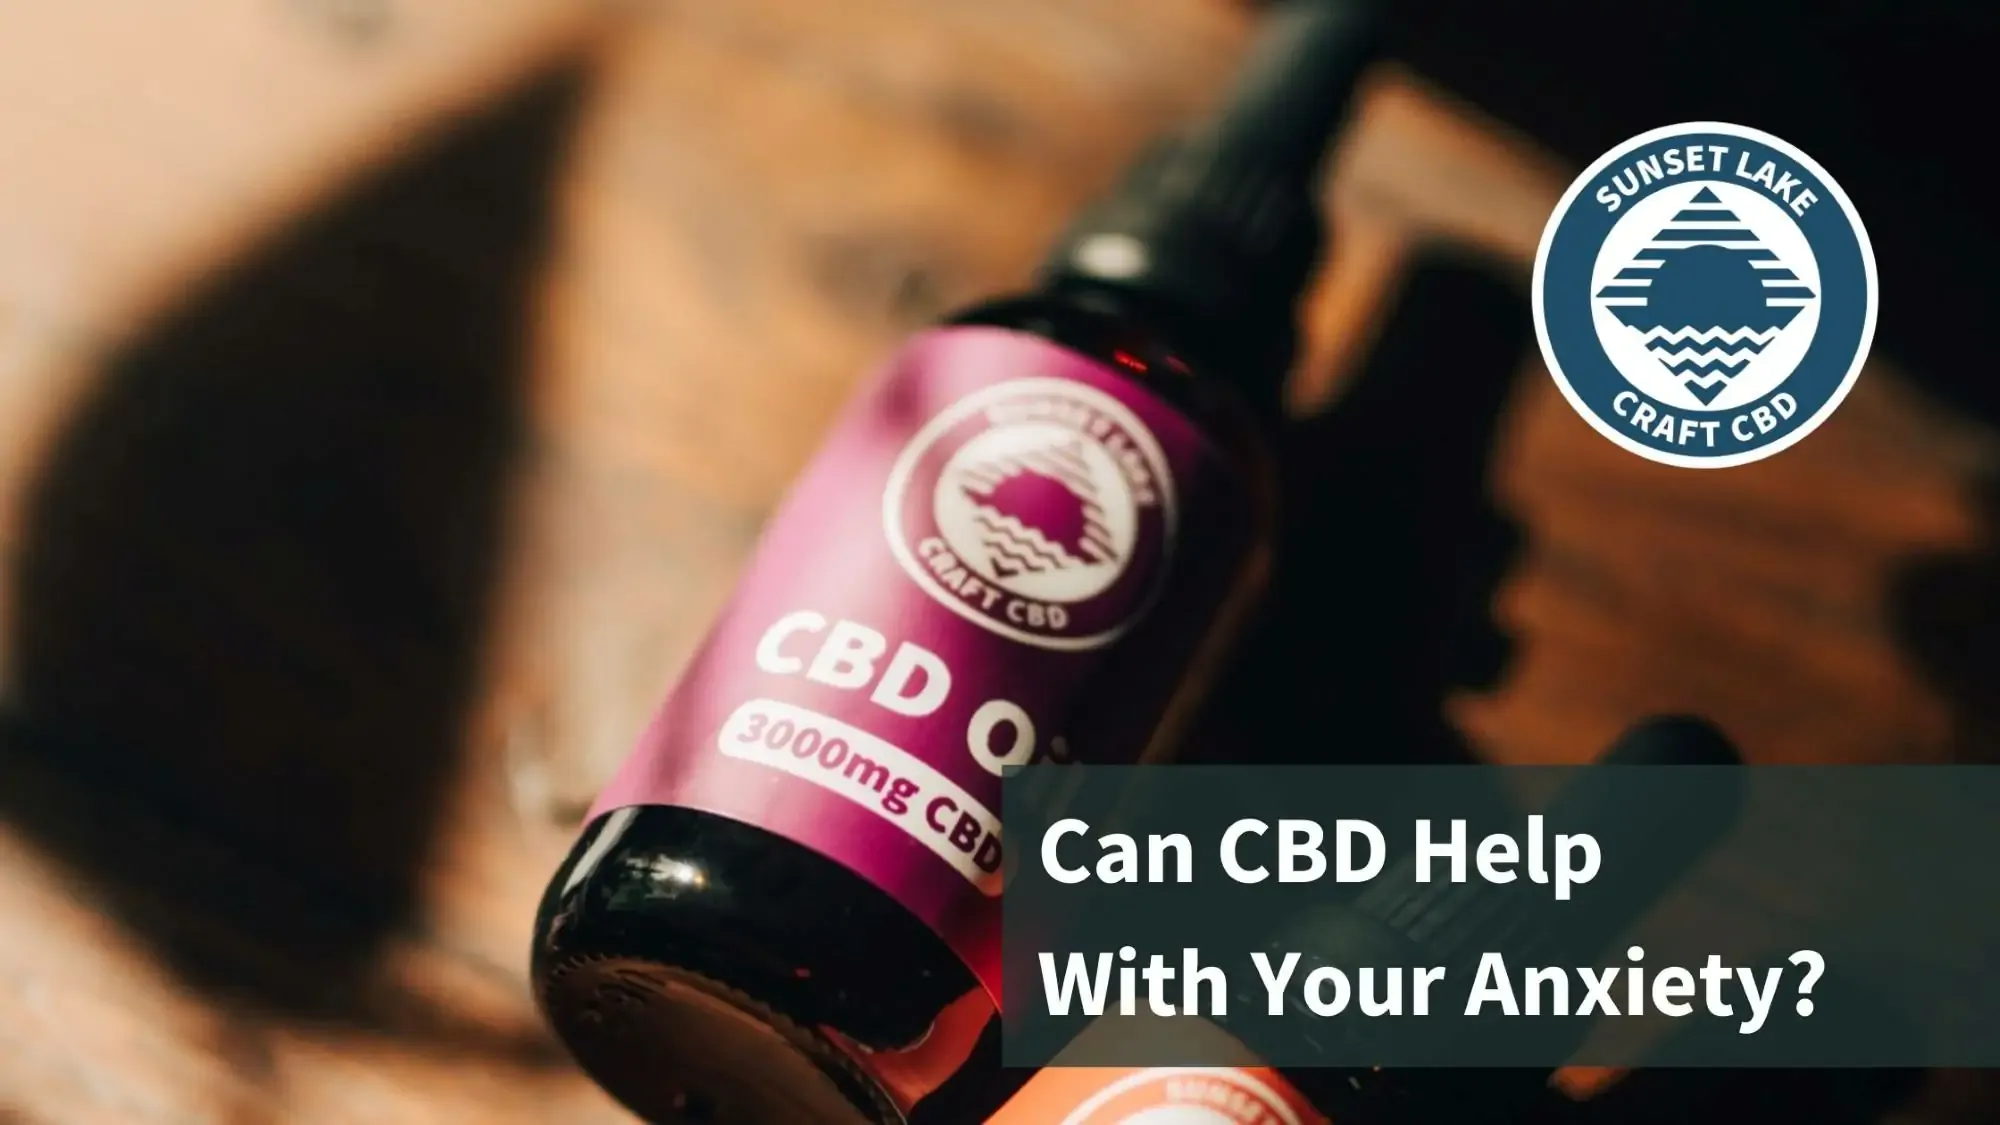 Sunset Lake CBD Oil laying on a wooden table